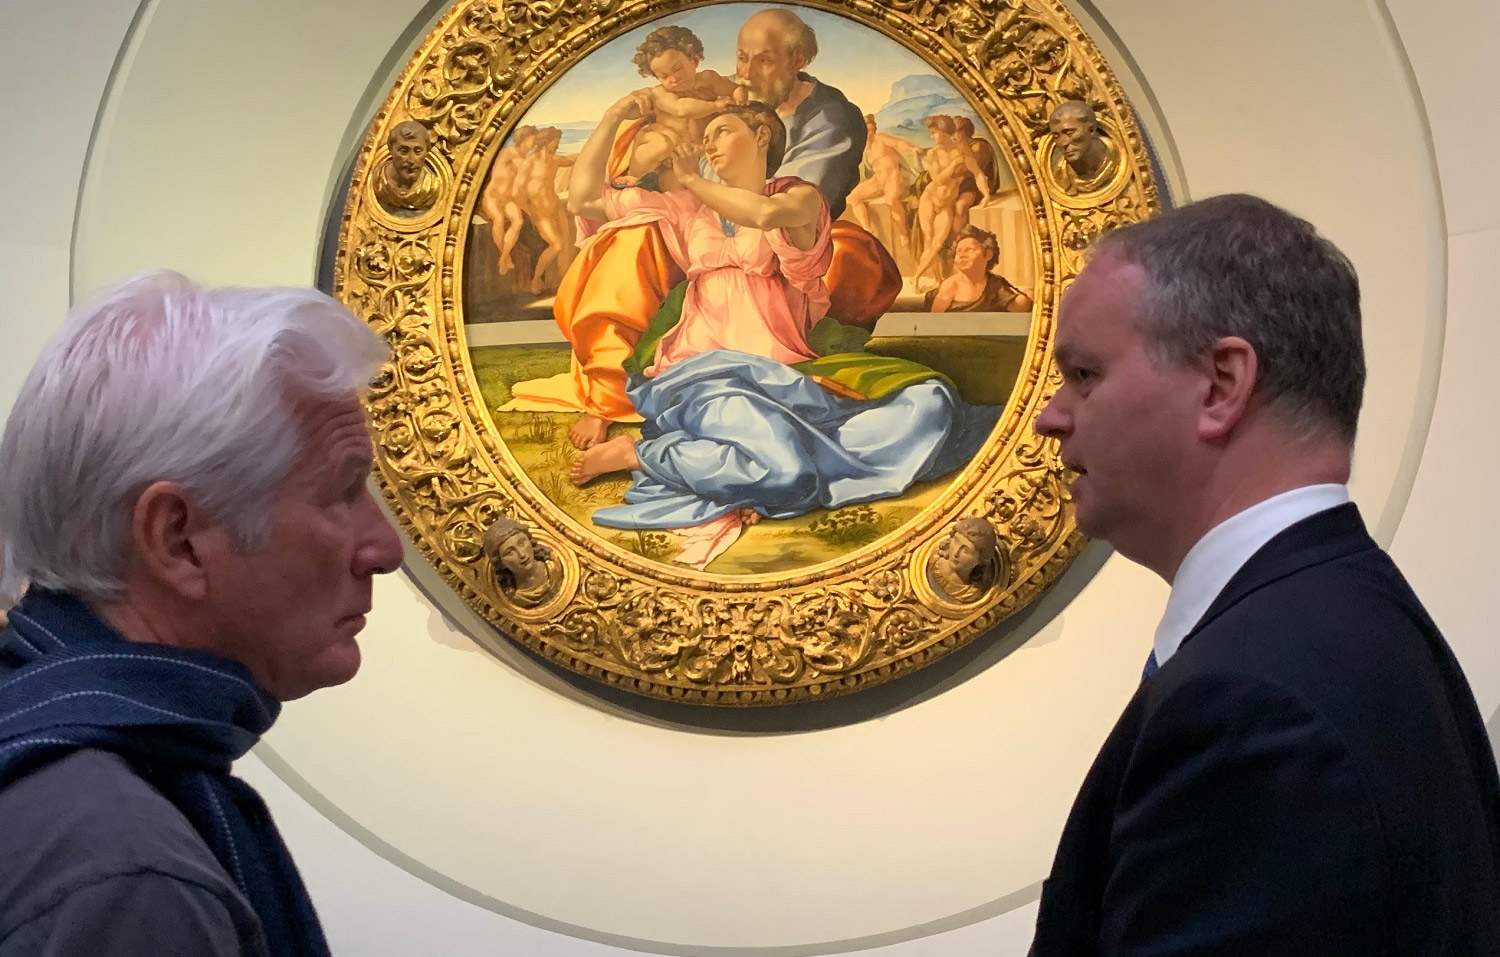 Richard Gere is in Florence: for him the keys to the city, and a visit to the Uffizi